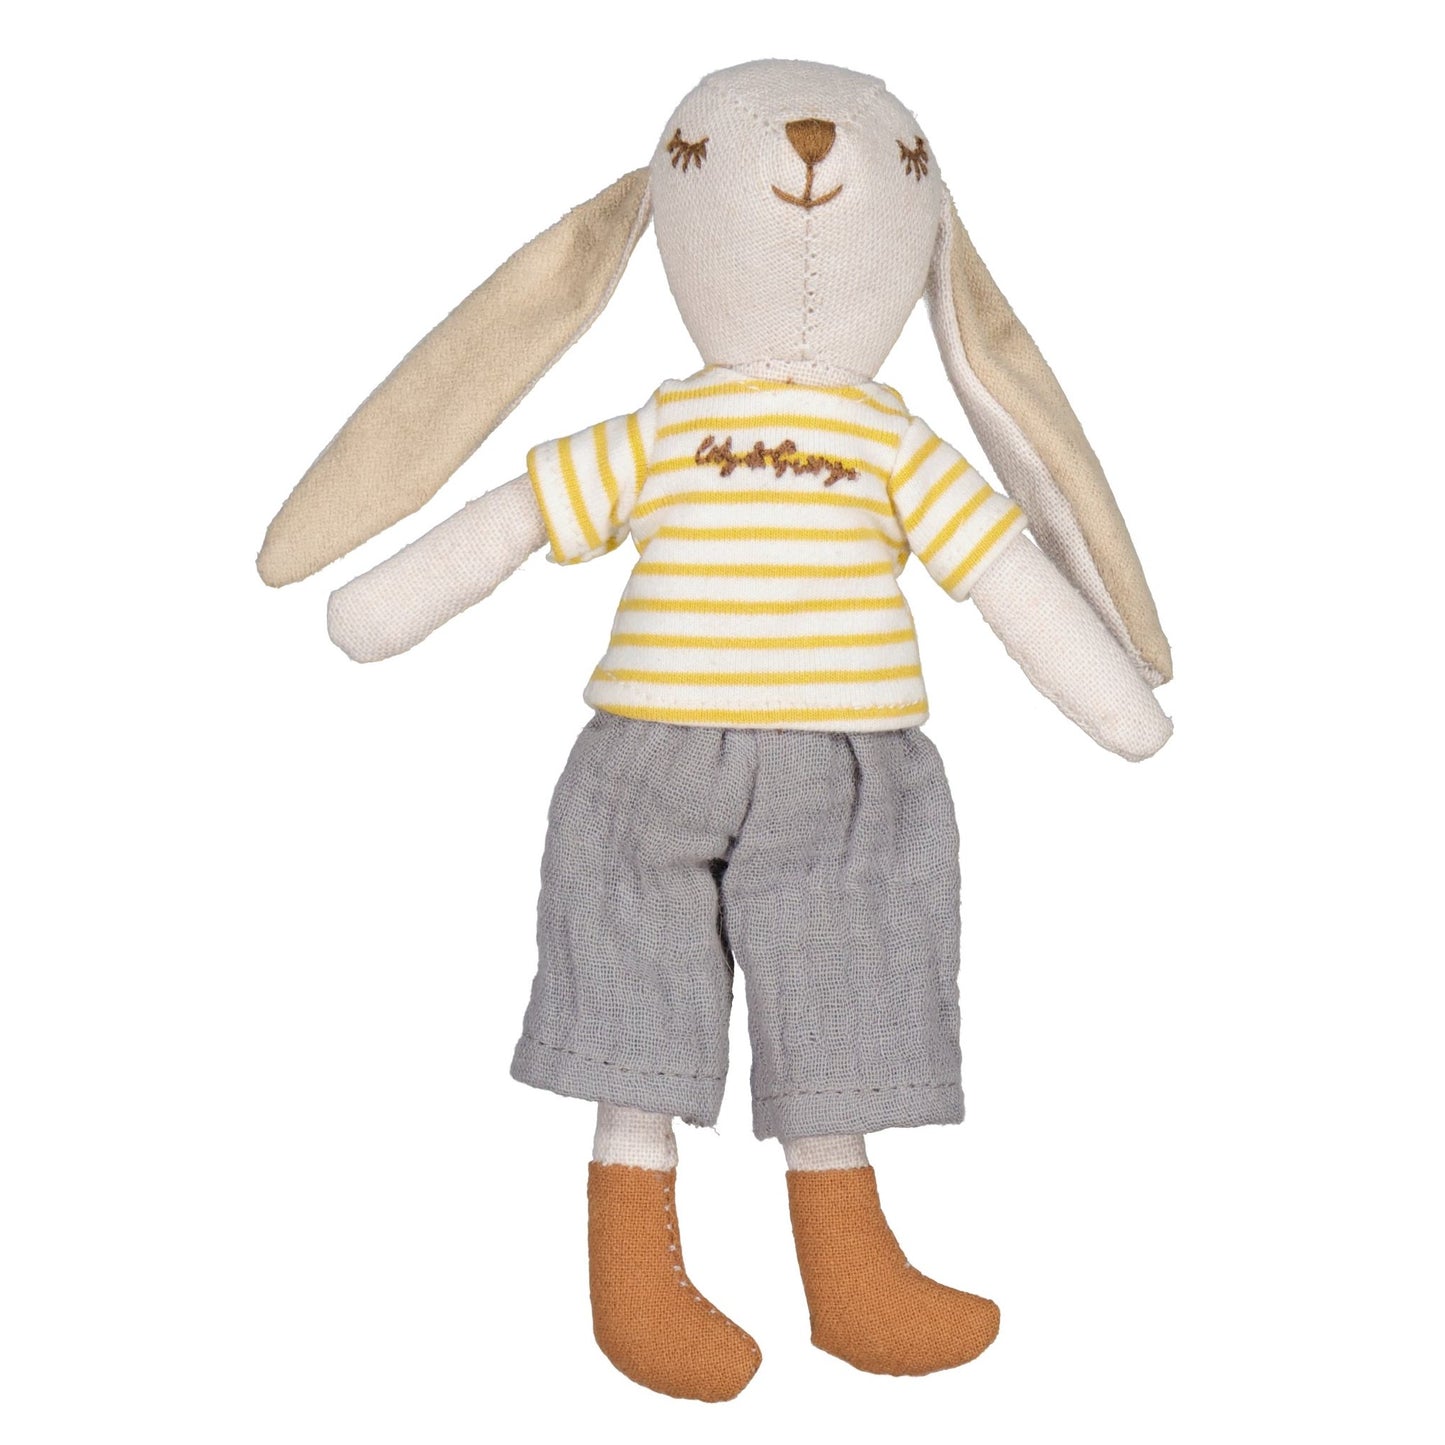 Louis the Bunny Mini Soft Toy